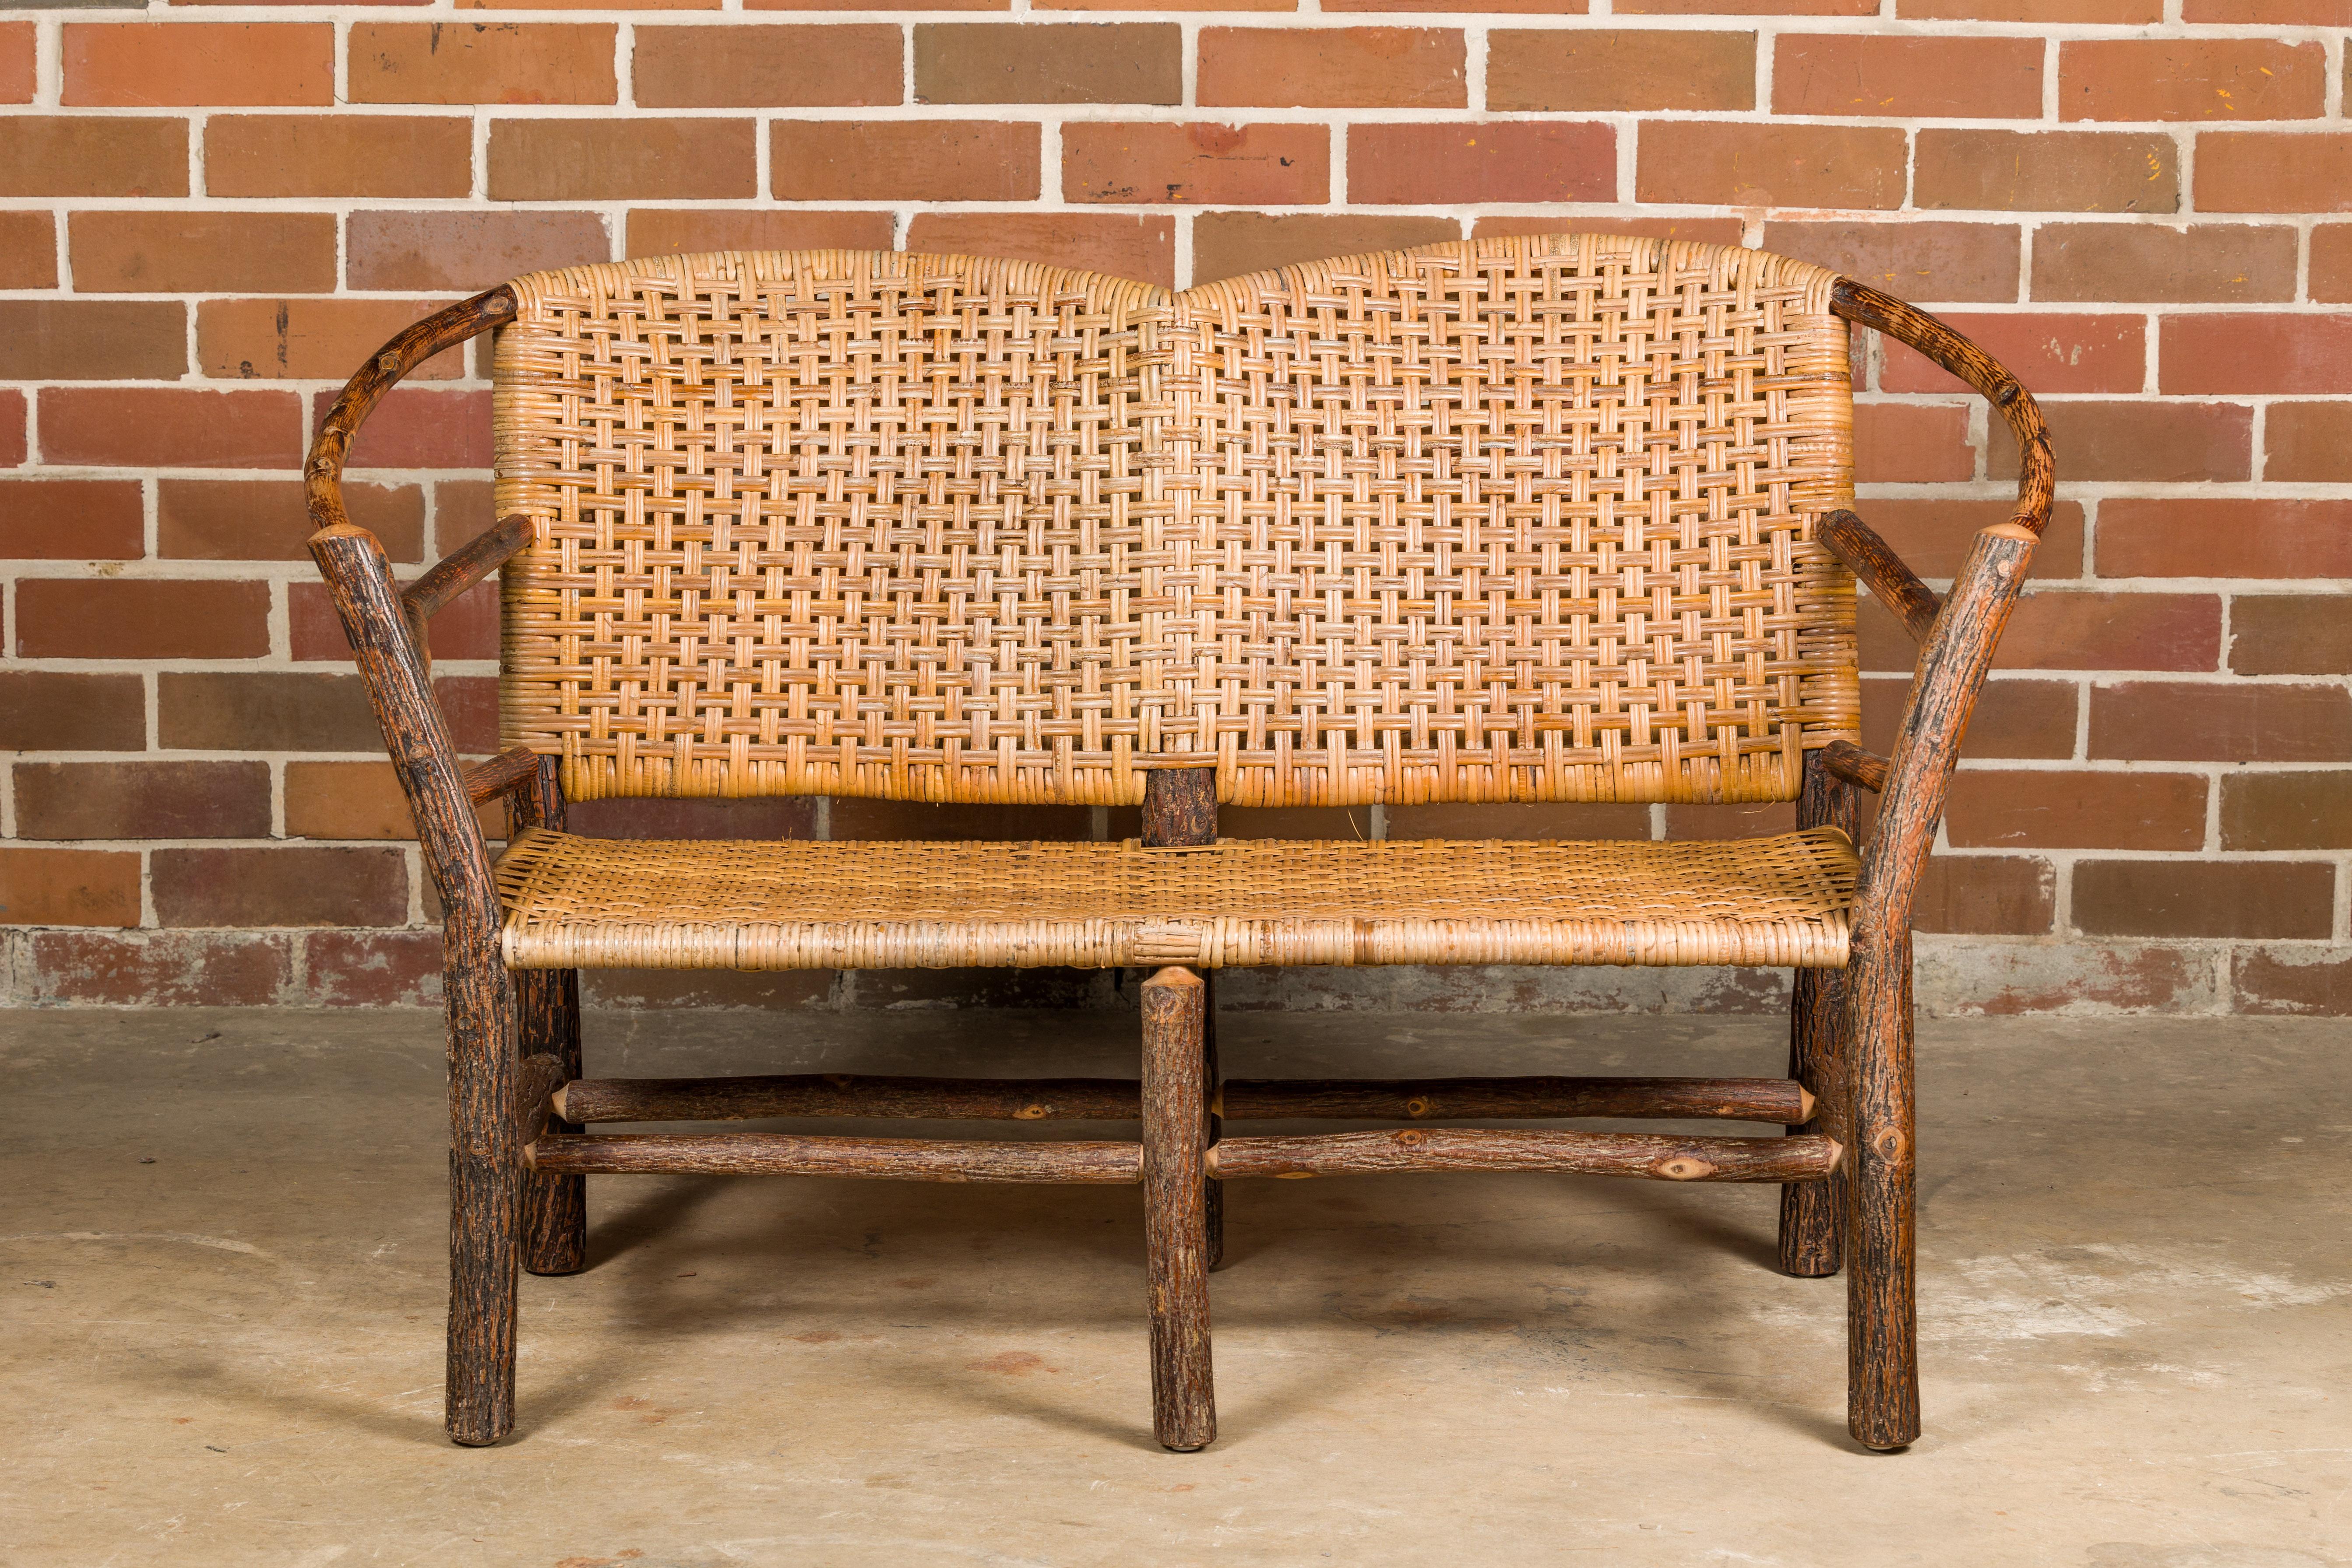 An Old Hickory hoop settee from the mid 20th century with woven rattan back and seat. This mid-20th-century Old Hickory hoop settee is a rustic masterpiece that seamlessly blends natural elements with functional design. Crafted with an artistic